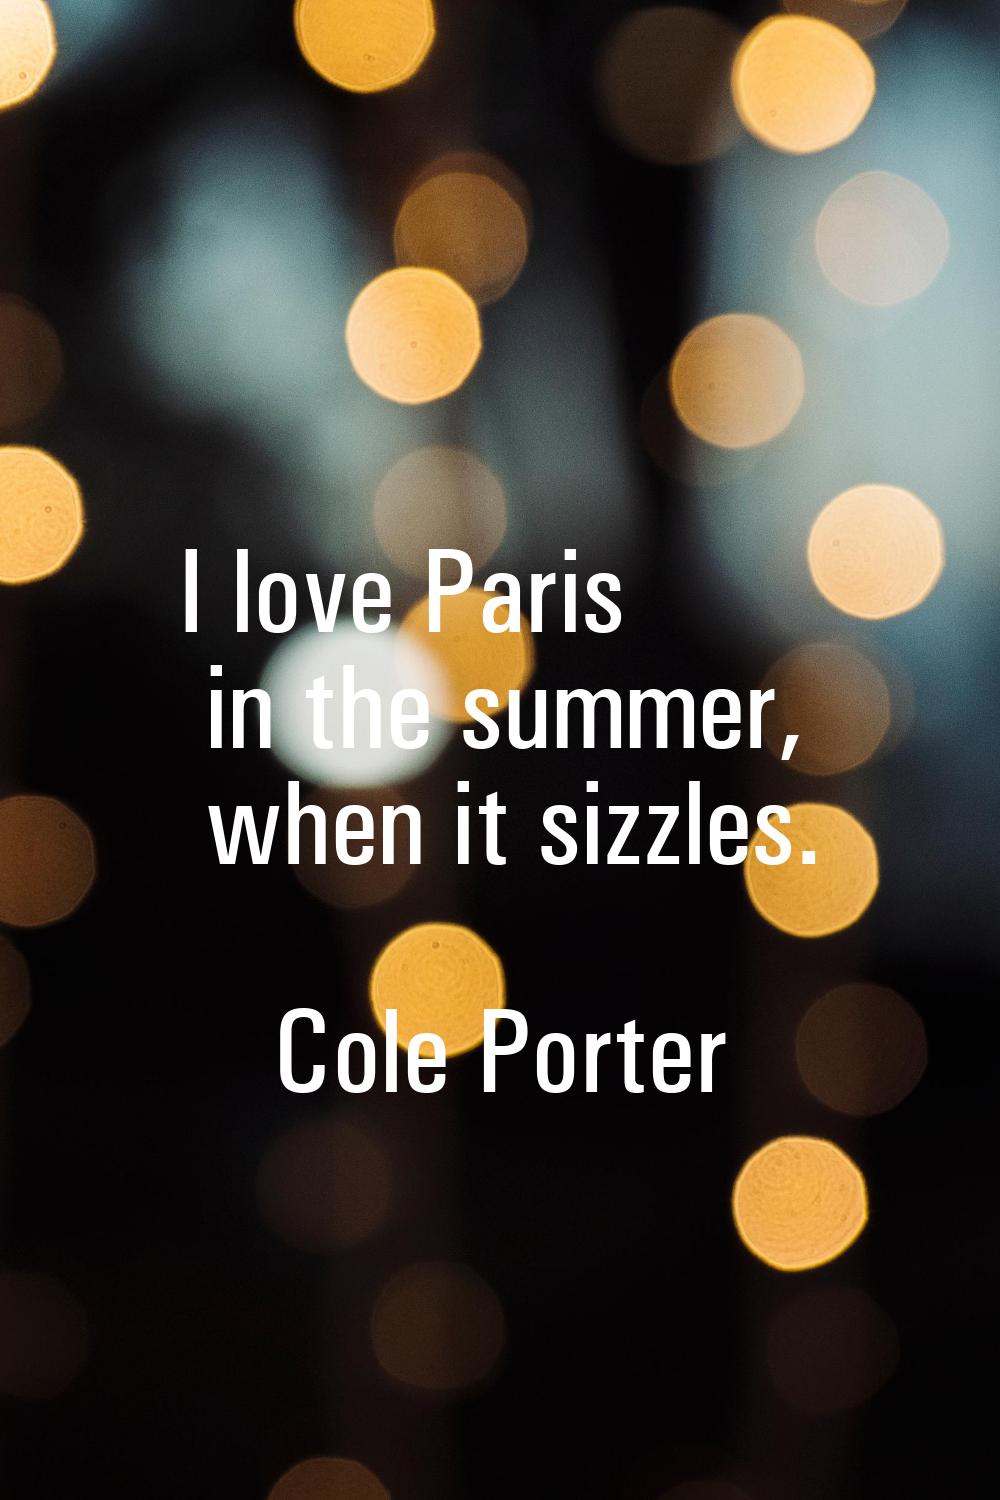 I love Paris in the summer, when it sizzles.